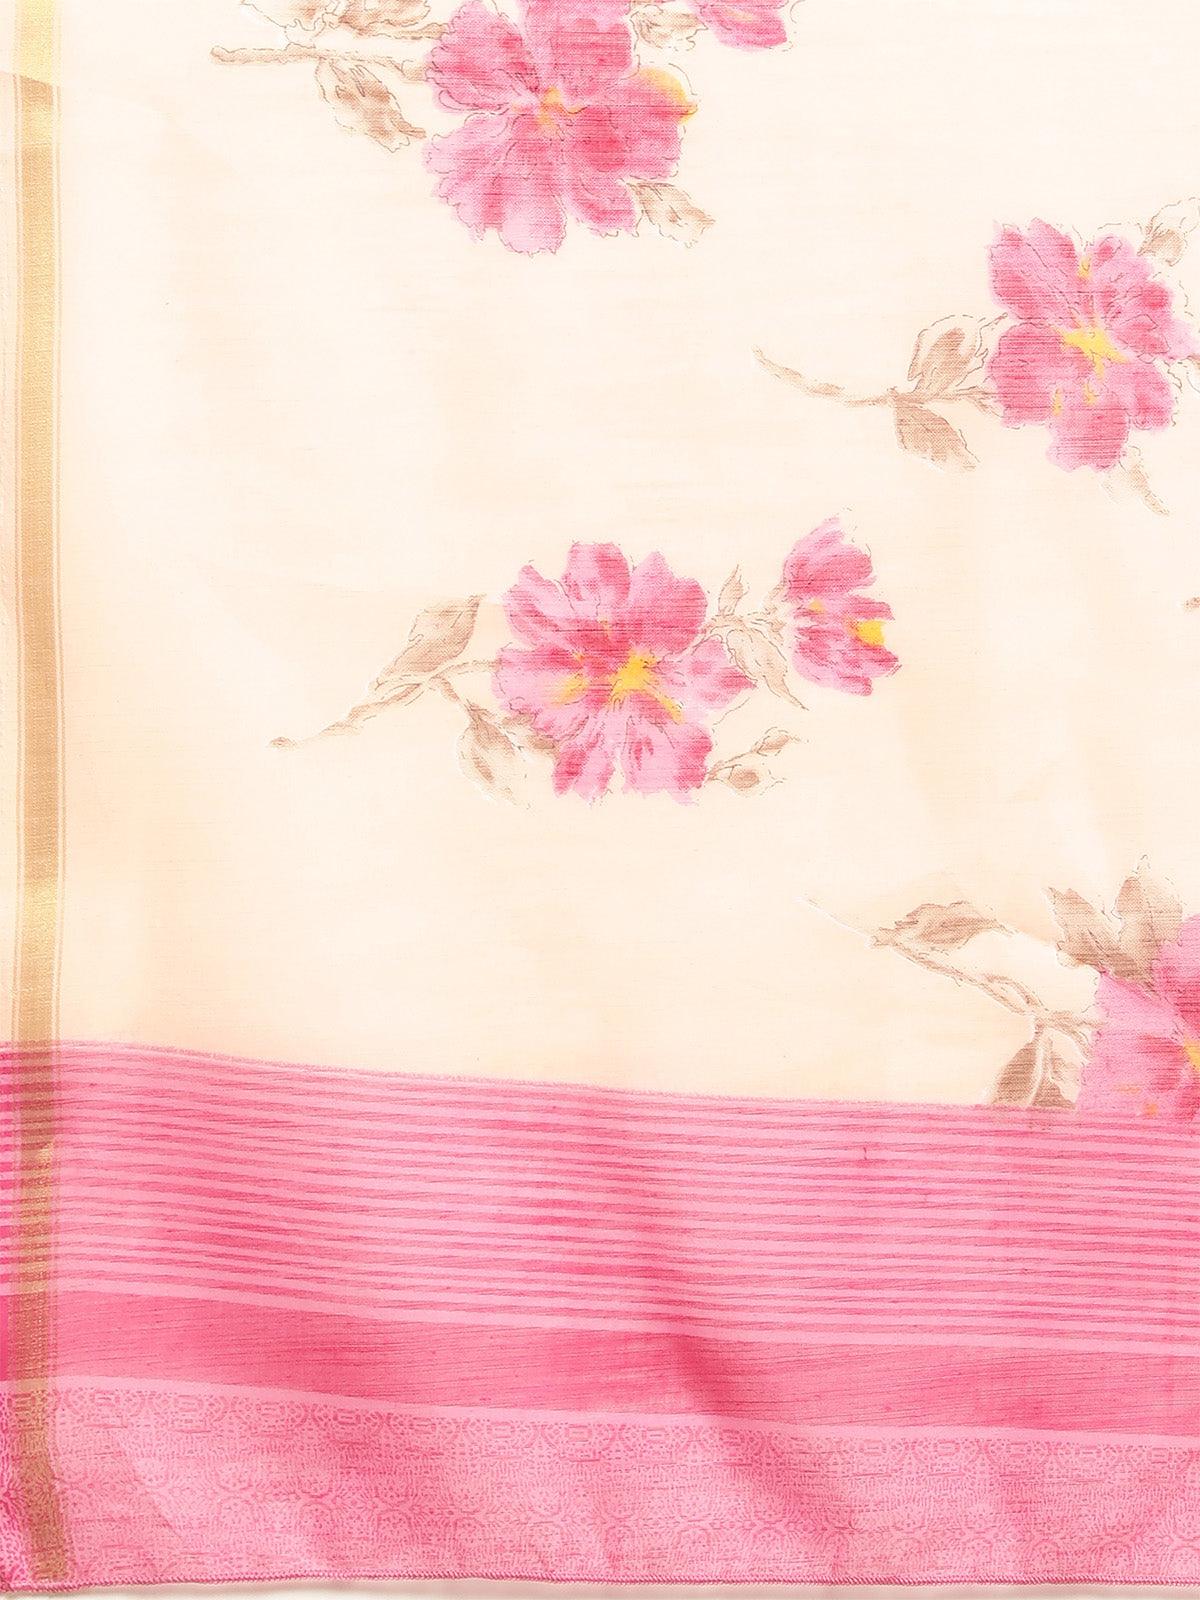 Women's Linen Blend Peach Printed Saree With Blouse Piece - Odette